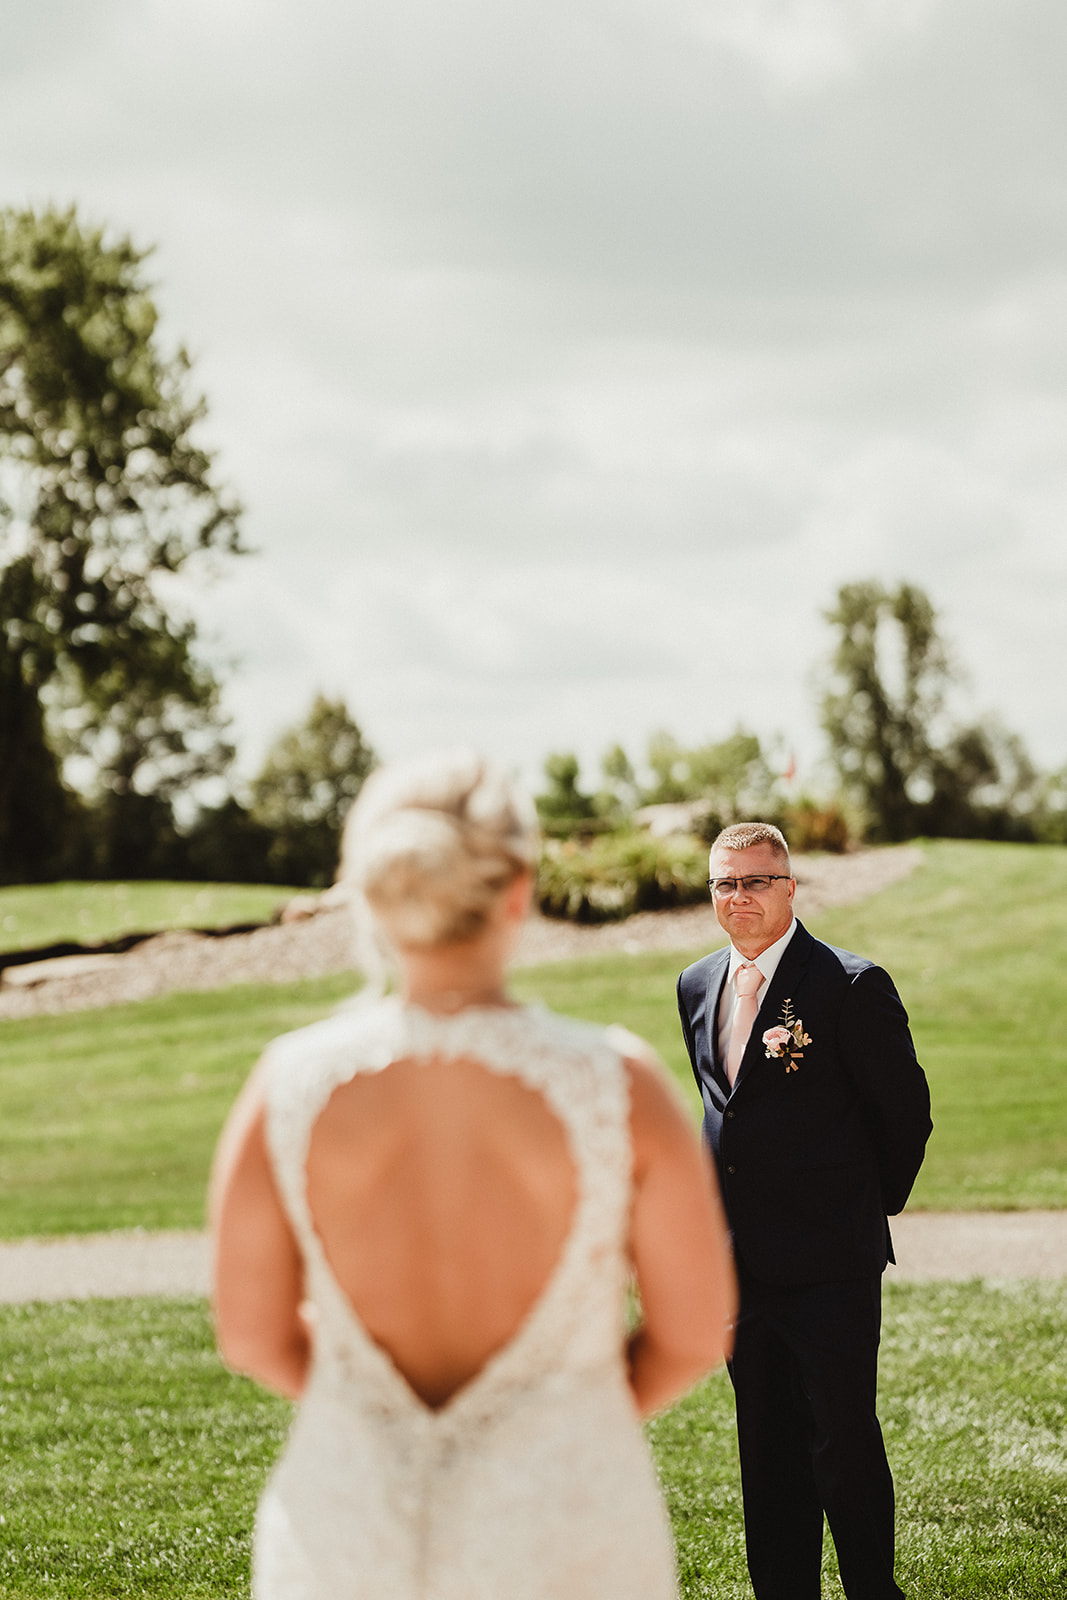 The father of the bride sees his daughter in her wedding gown during an emotional first look session. Father of the bride First look photos Wisconsin bride #wisconsinweddingphotographer #choosingaphotographer #lakesidewedding #waterfrontweddingceremony